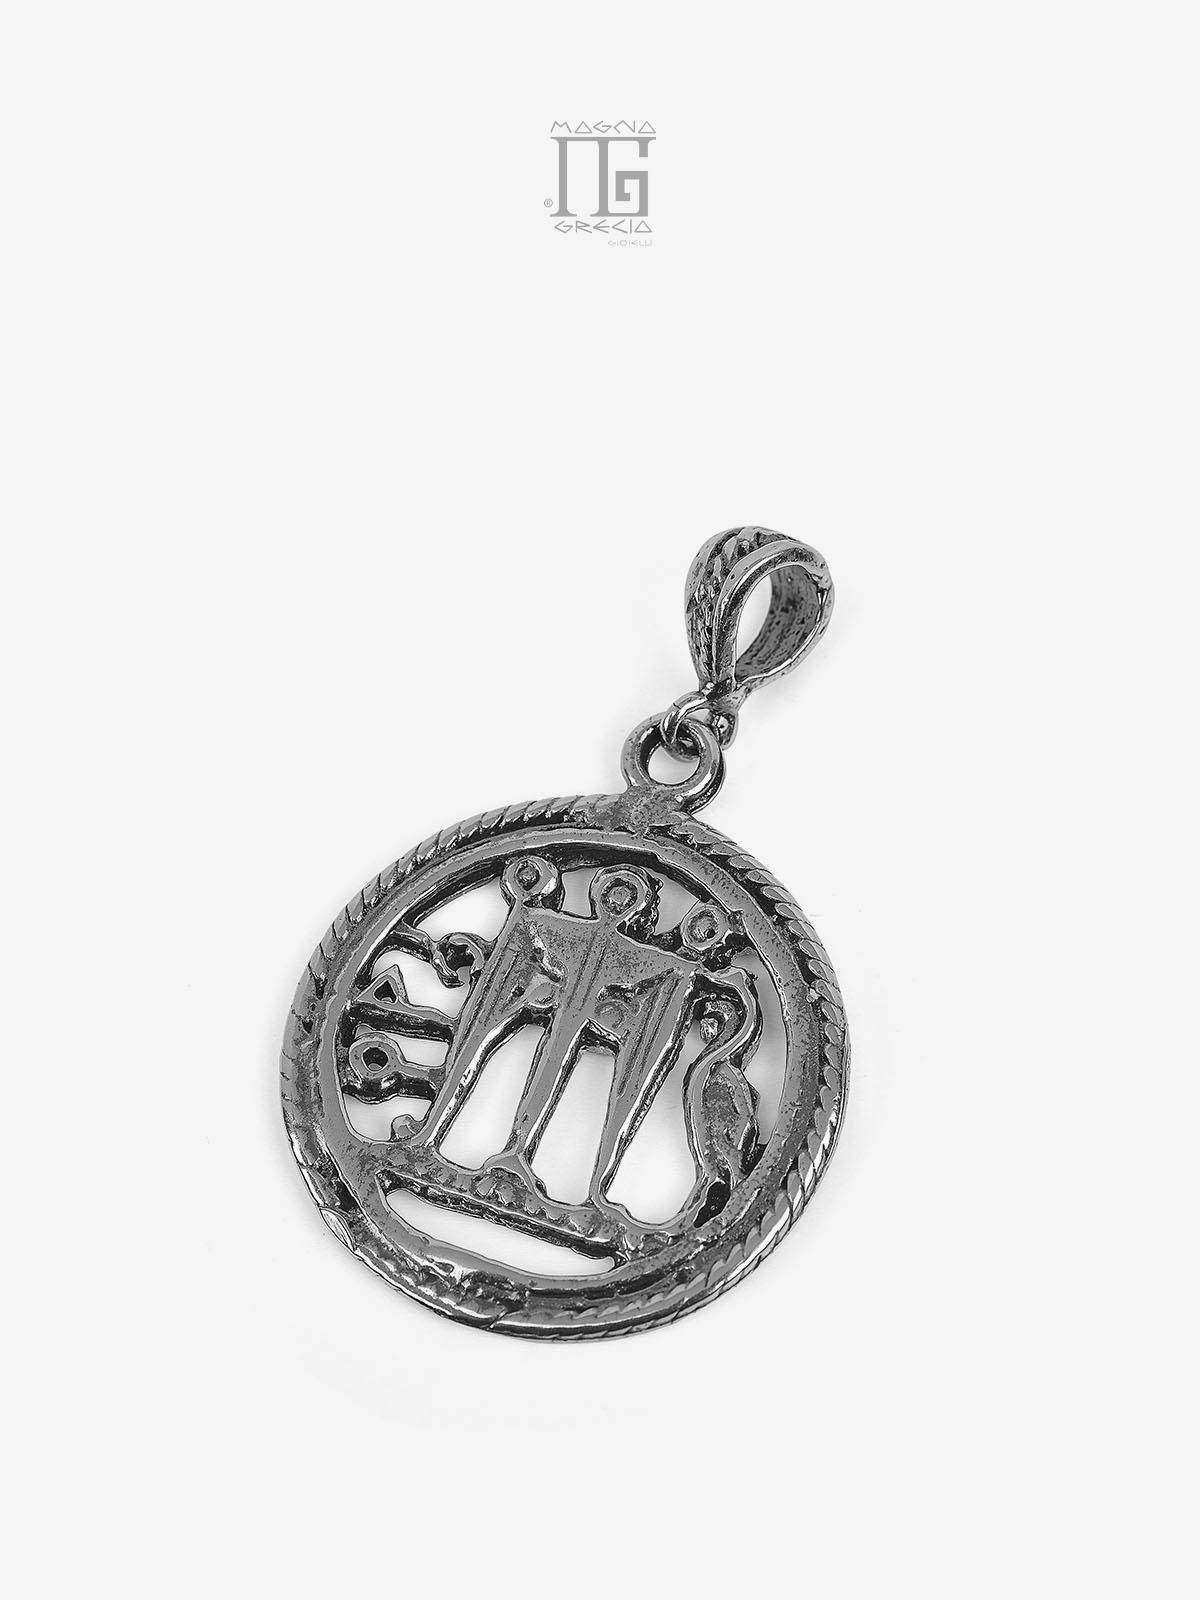 Silver pendant with Stater coin Code MGK 3829 V